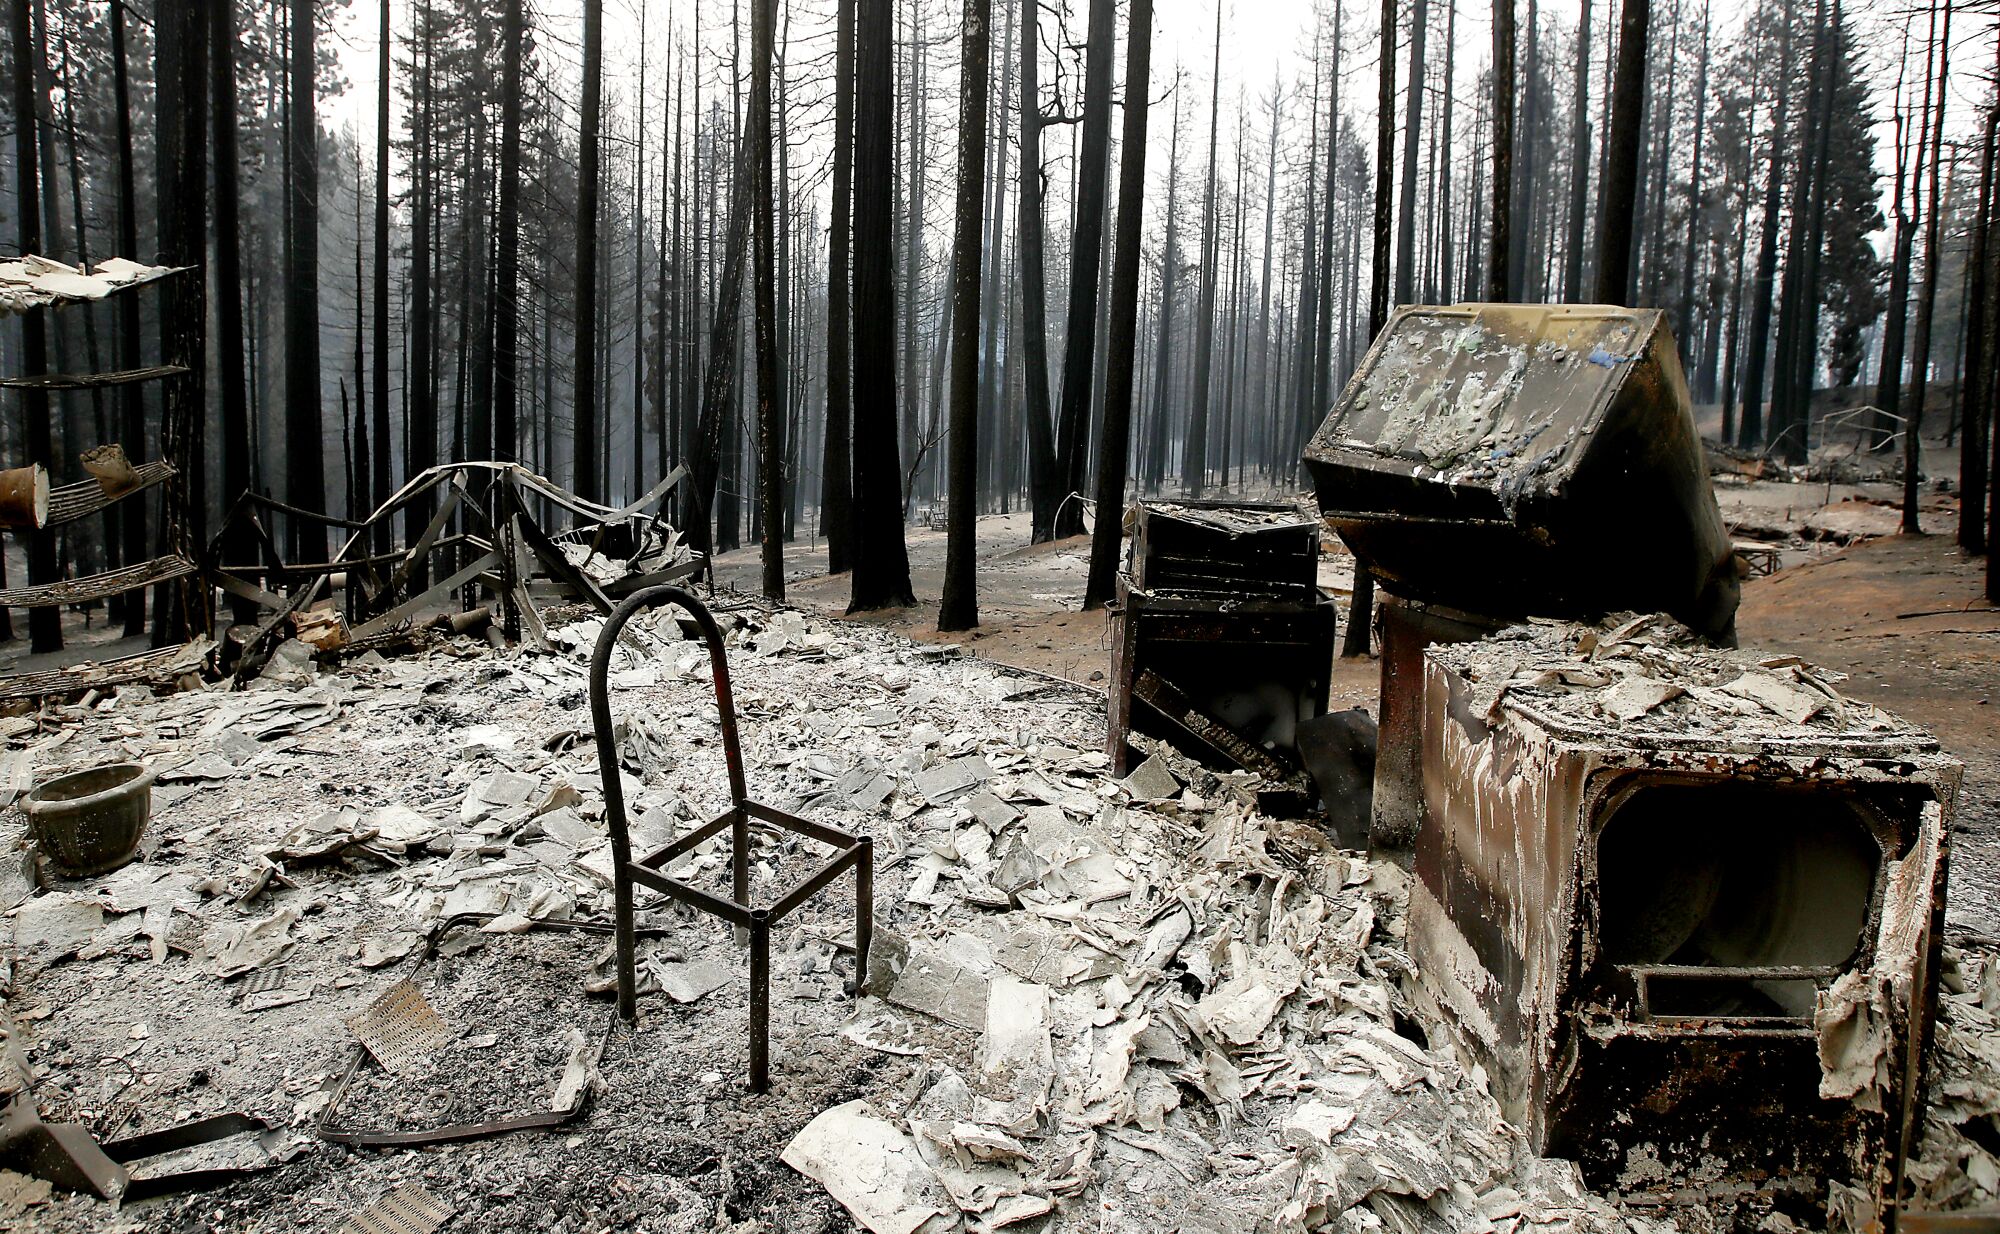 A chair frame in a burned home in the woods